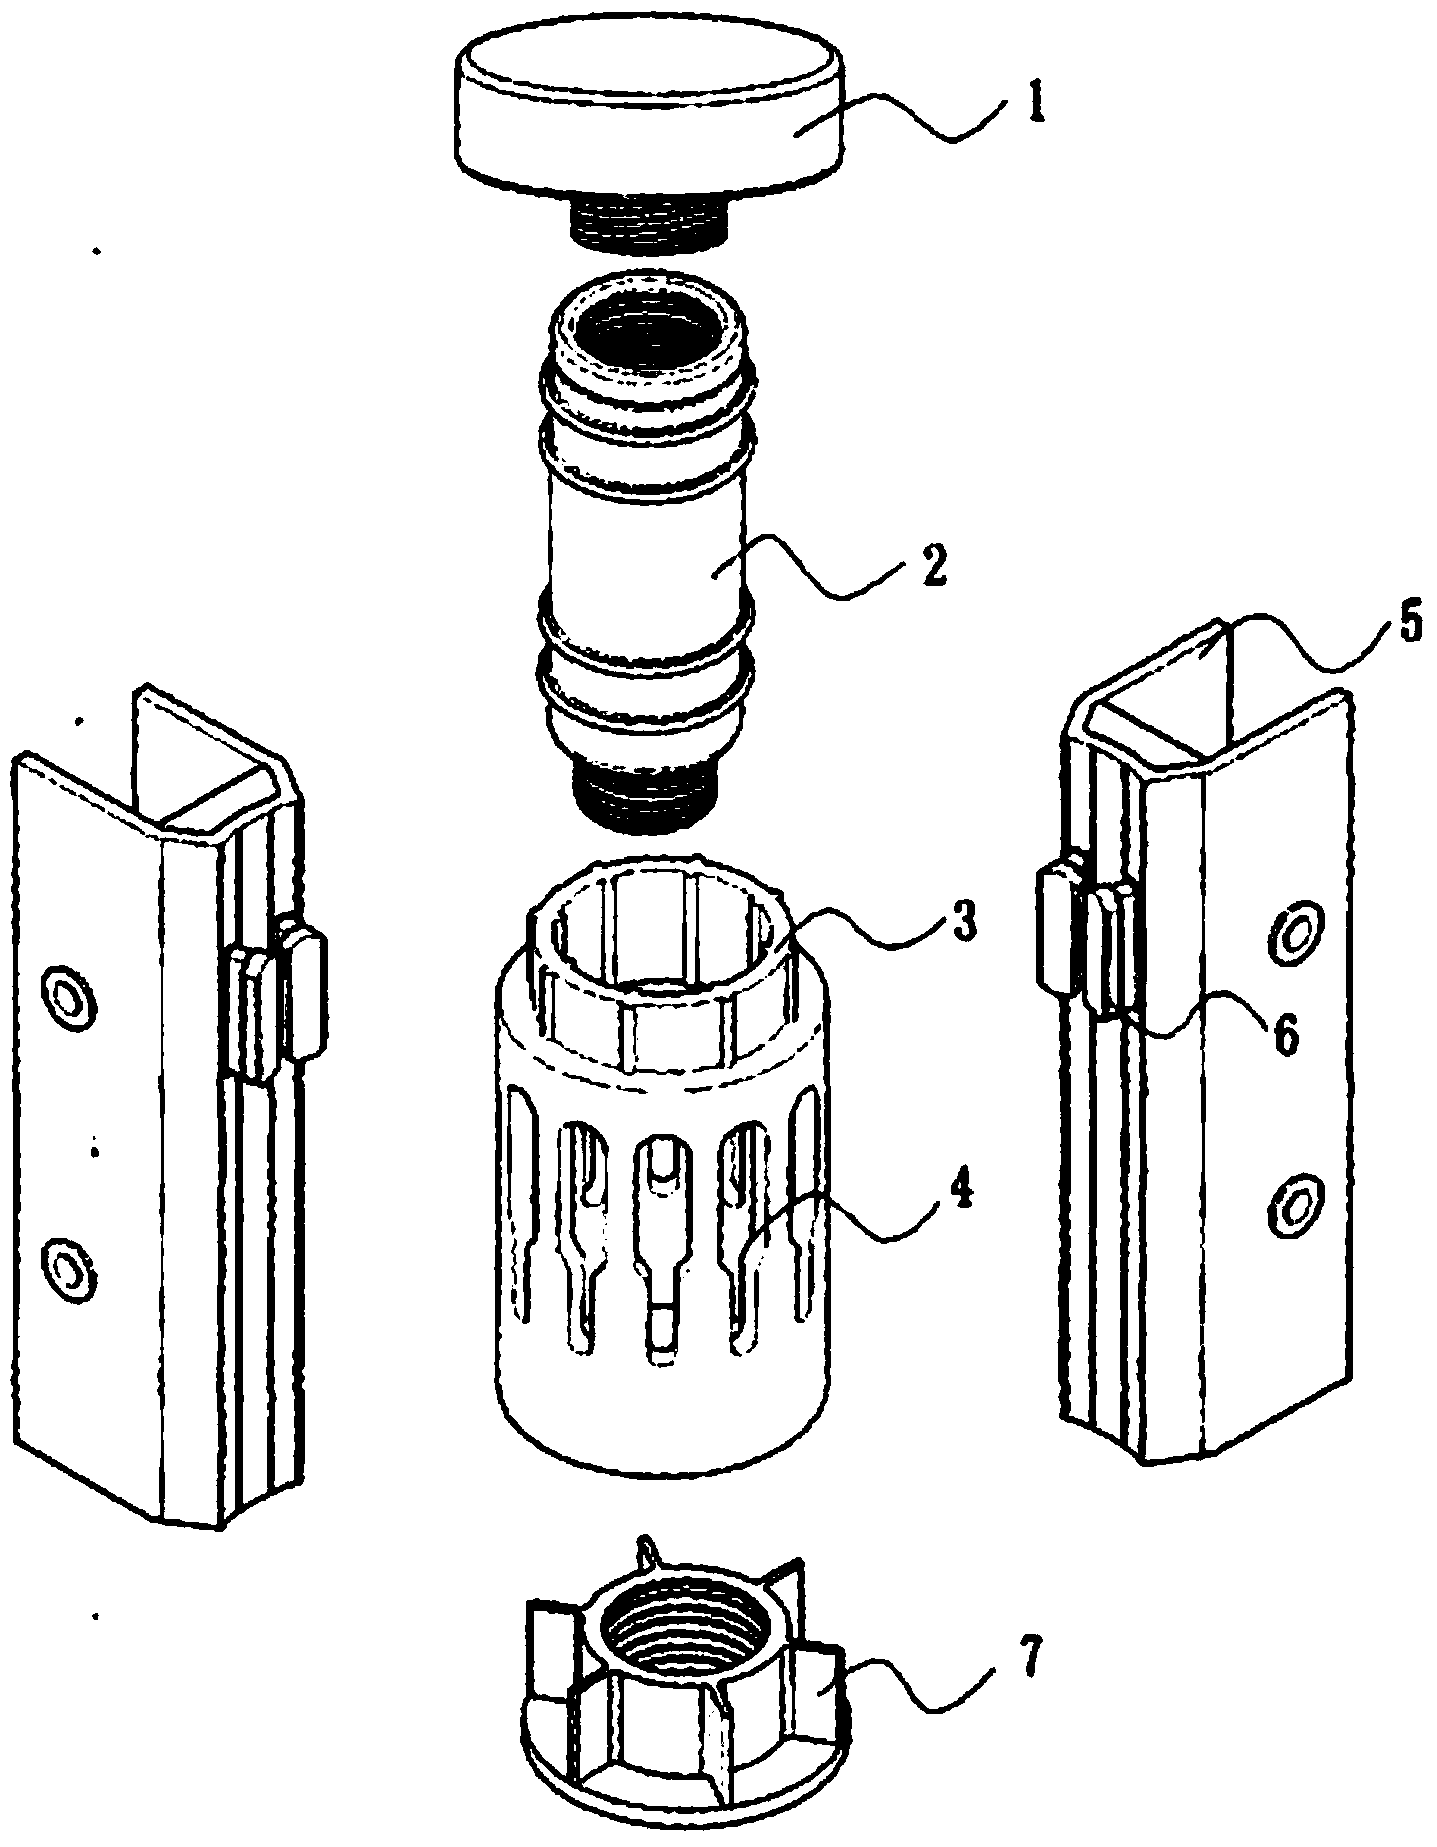 Modularized combined box body and connecting component thereof